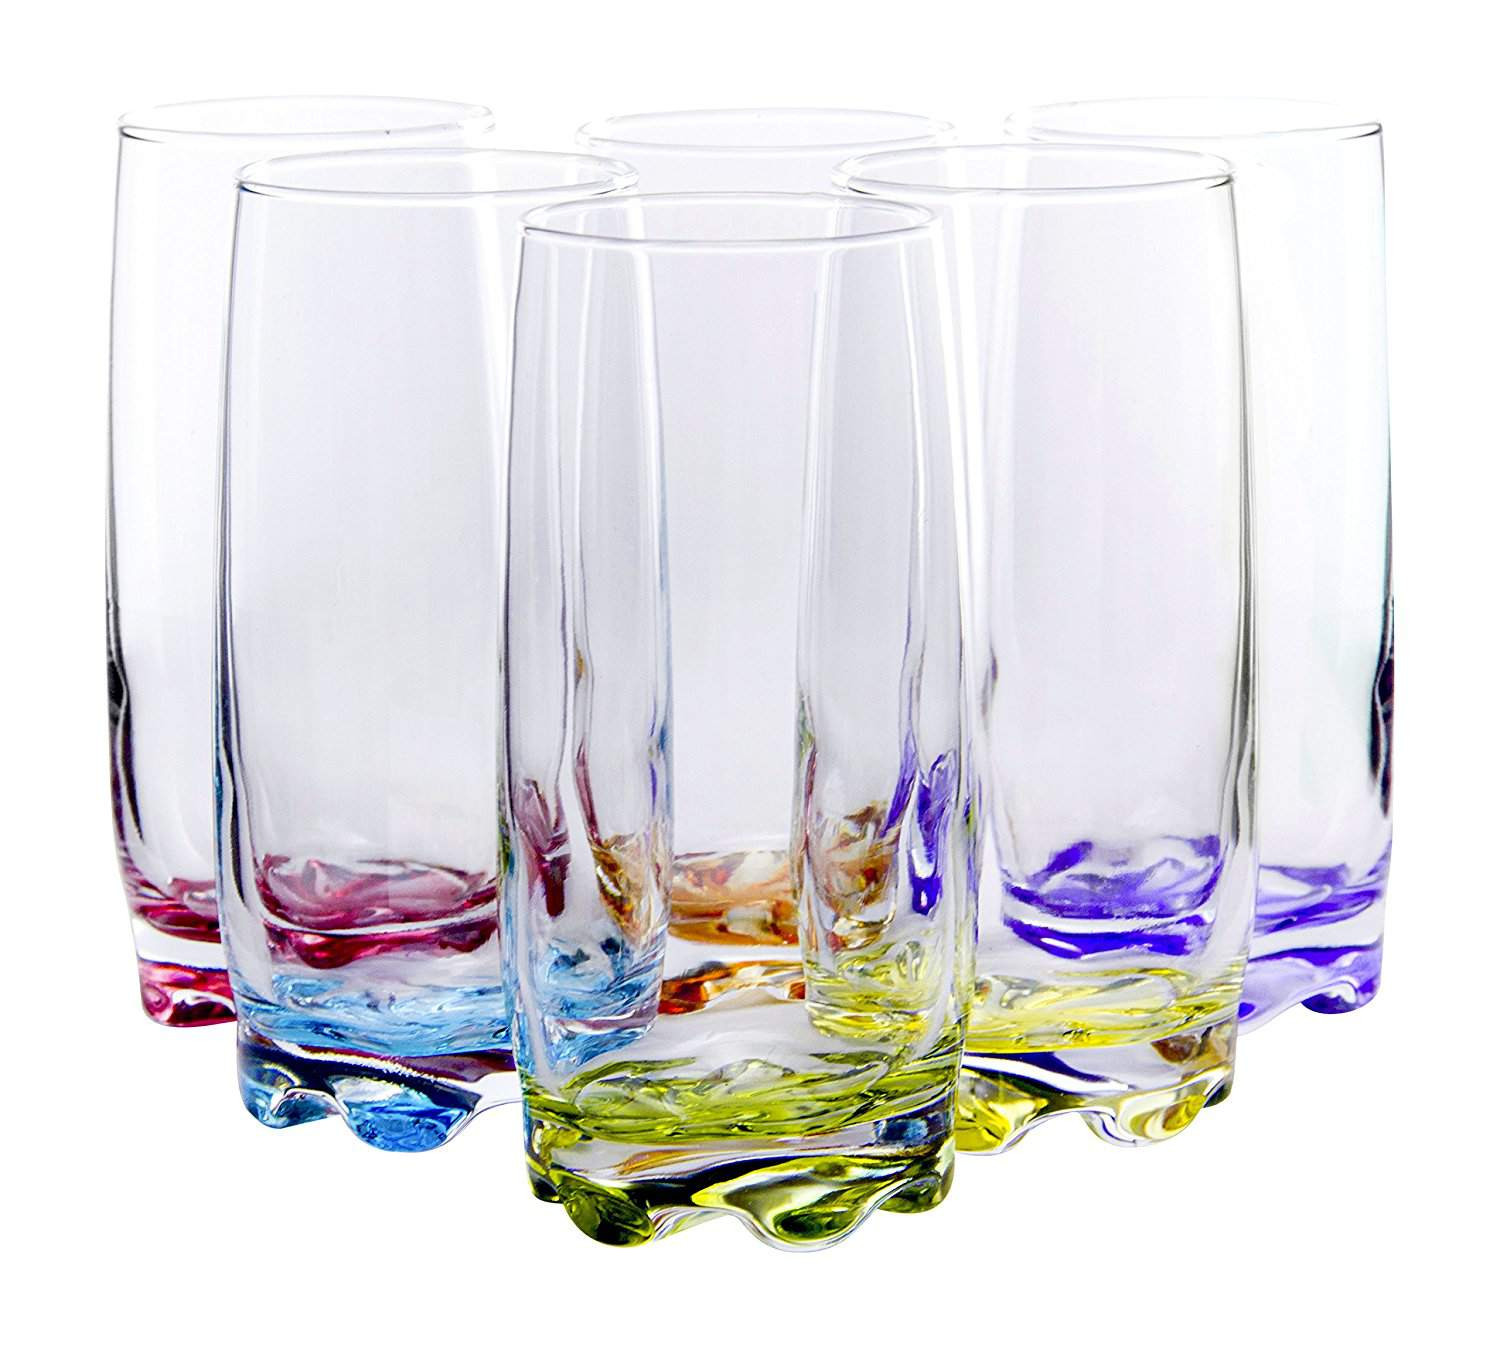 13 Stunning 6 X 6 Glass Cube Vases 2024 free download 6 x 6 glass cube vases of the 7 best drinking glasses to buy in 2018 within vibrant splash water beverage highball glasses 13 25 ounce set of 6